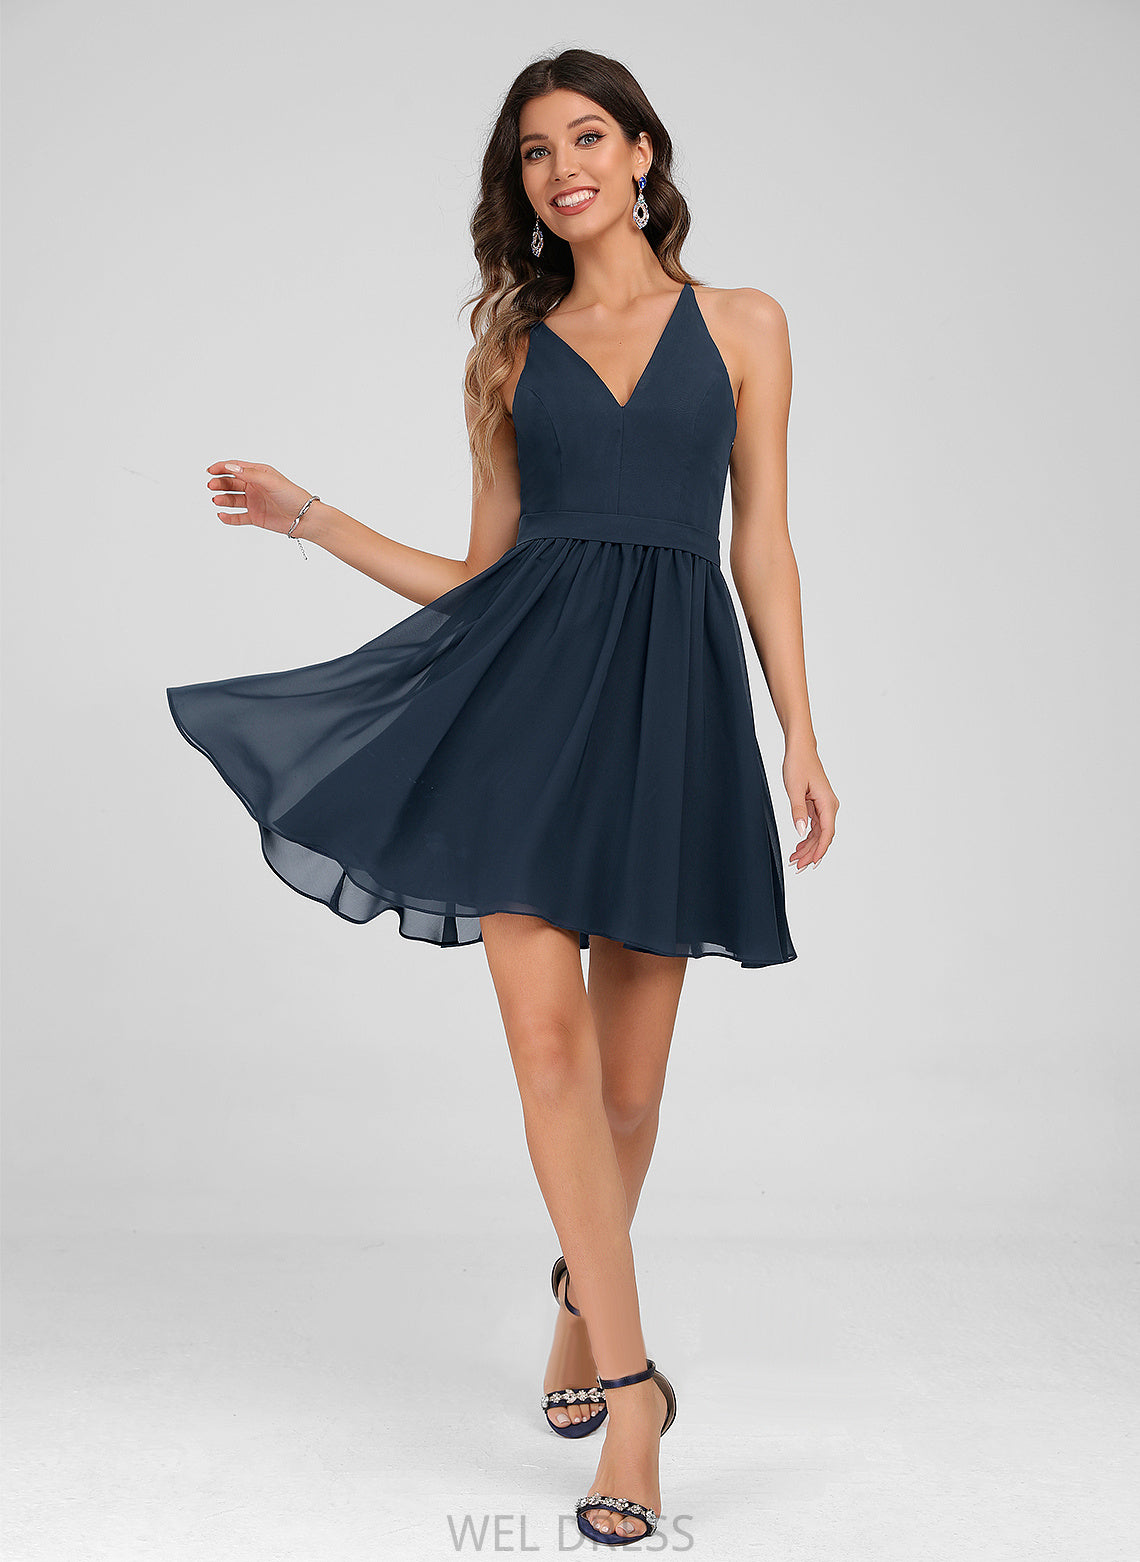 Chiffon Homecoming Homecoming Dresses With Short/Mini V-neck A-Line Rylie Dress Lace